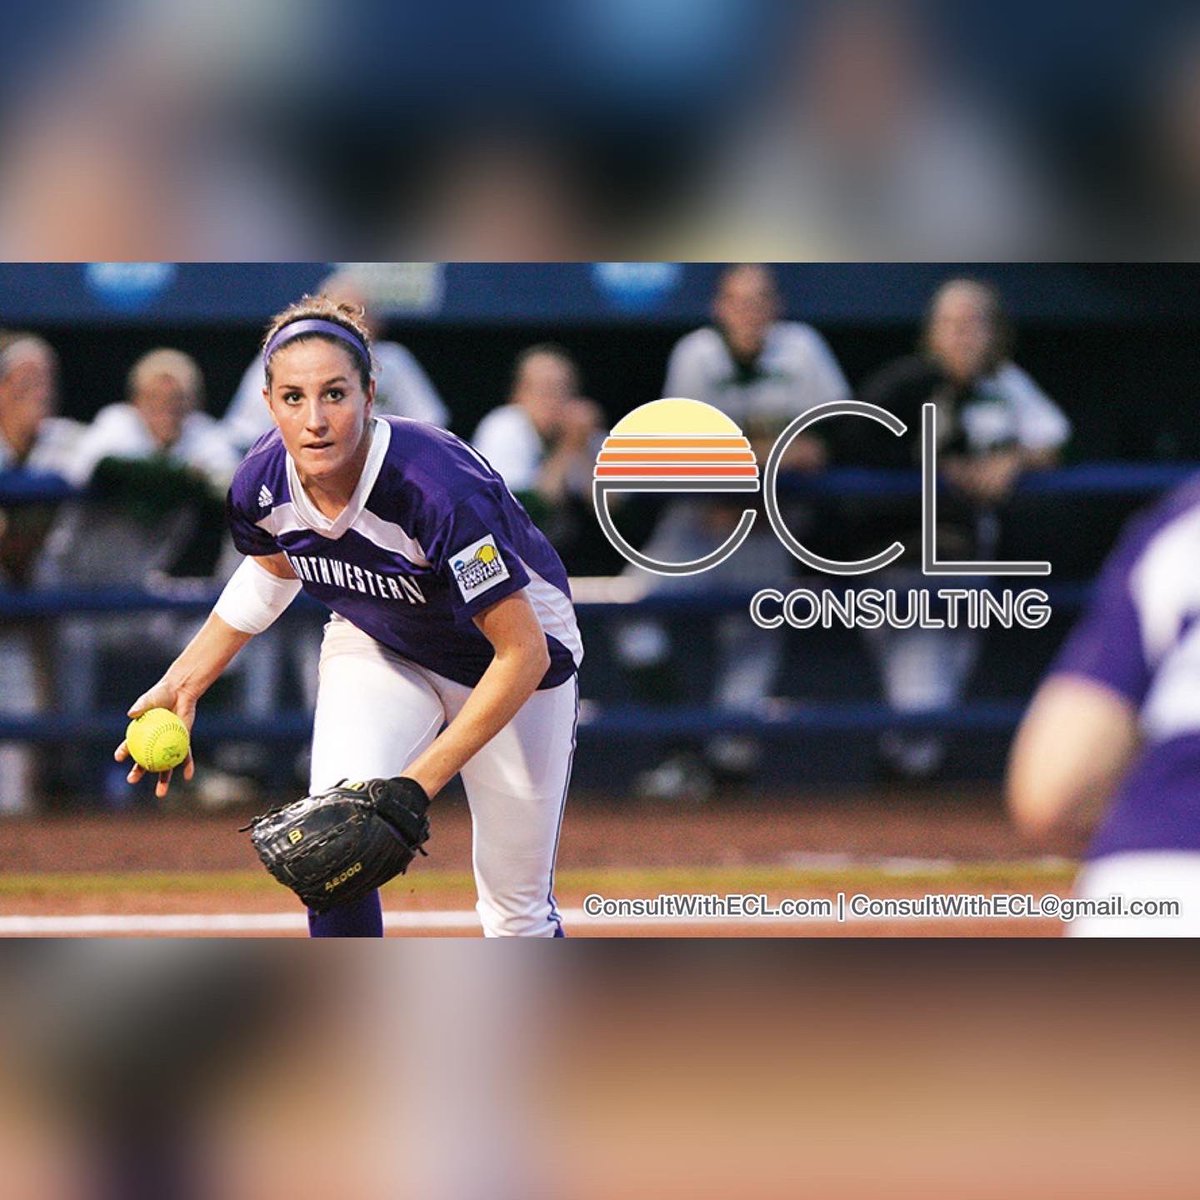 🔦Alumni Spotlight: Eileen Canney Linnehan (‘07) After her remarkable career as a Wildcat, Eileen now uses her @sesp_nu degree & her own experience with the yips to mentor athletes with similar mental barriers. To learn more about Eileen visit consultwithecl.com #GoCats